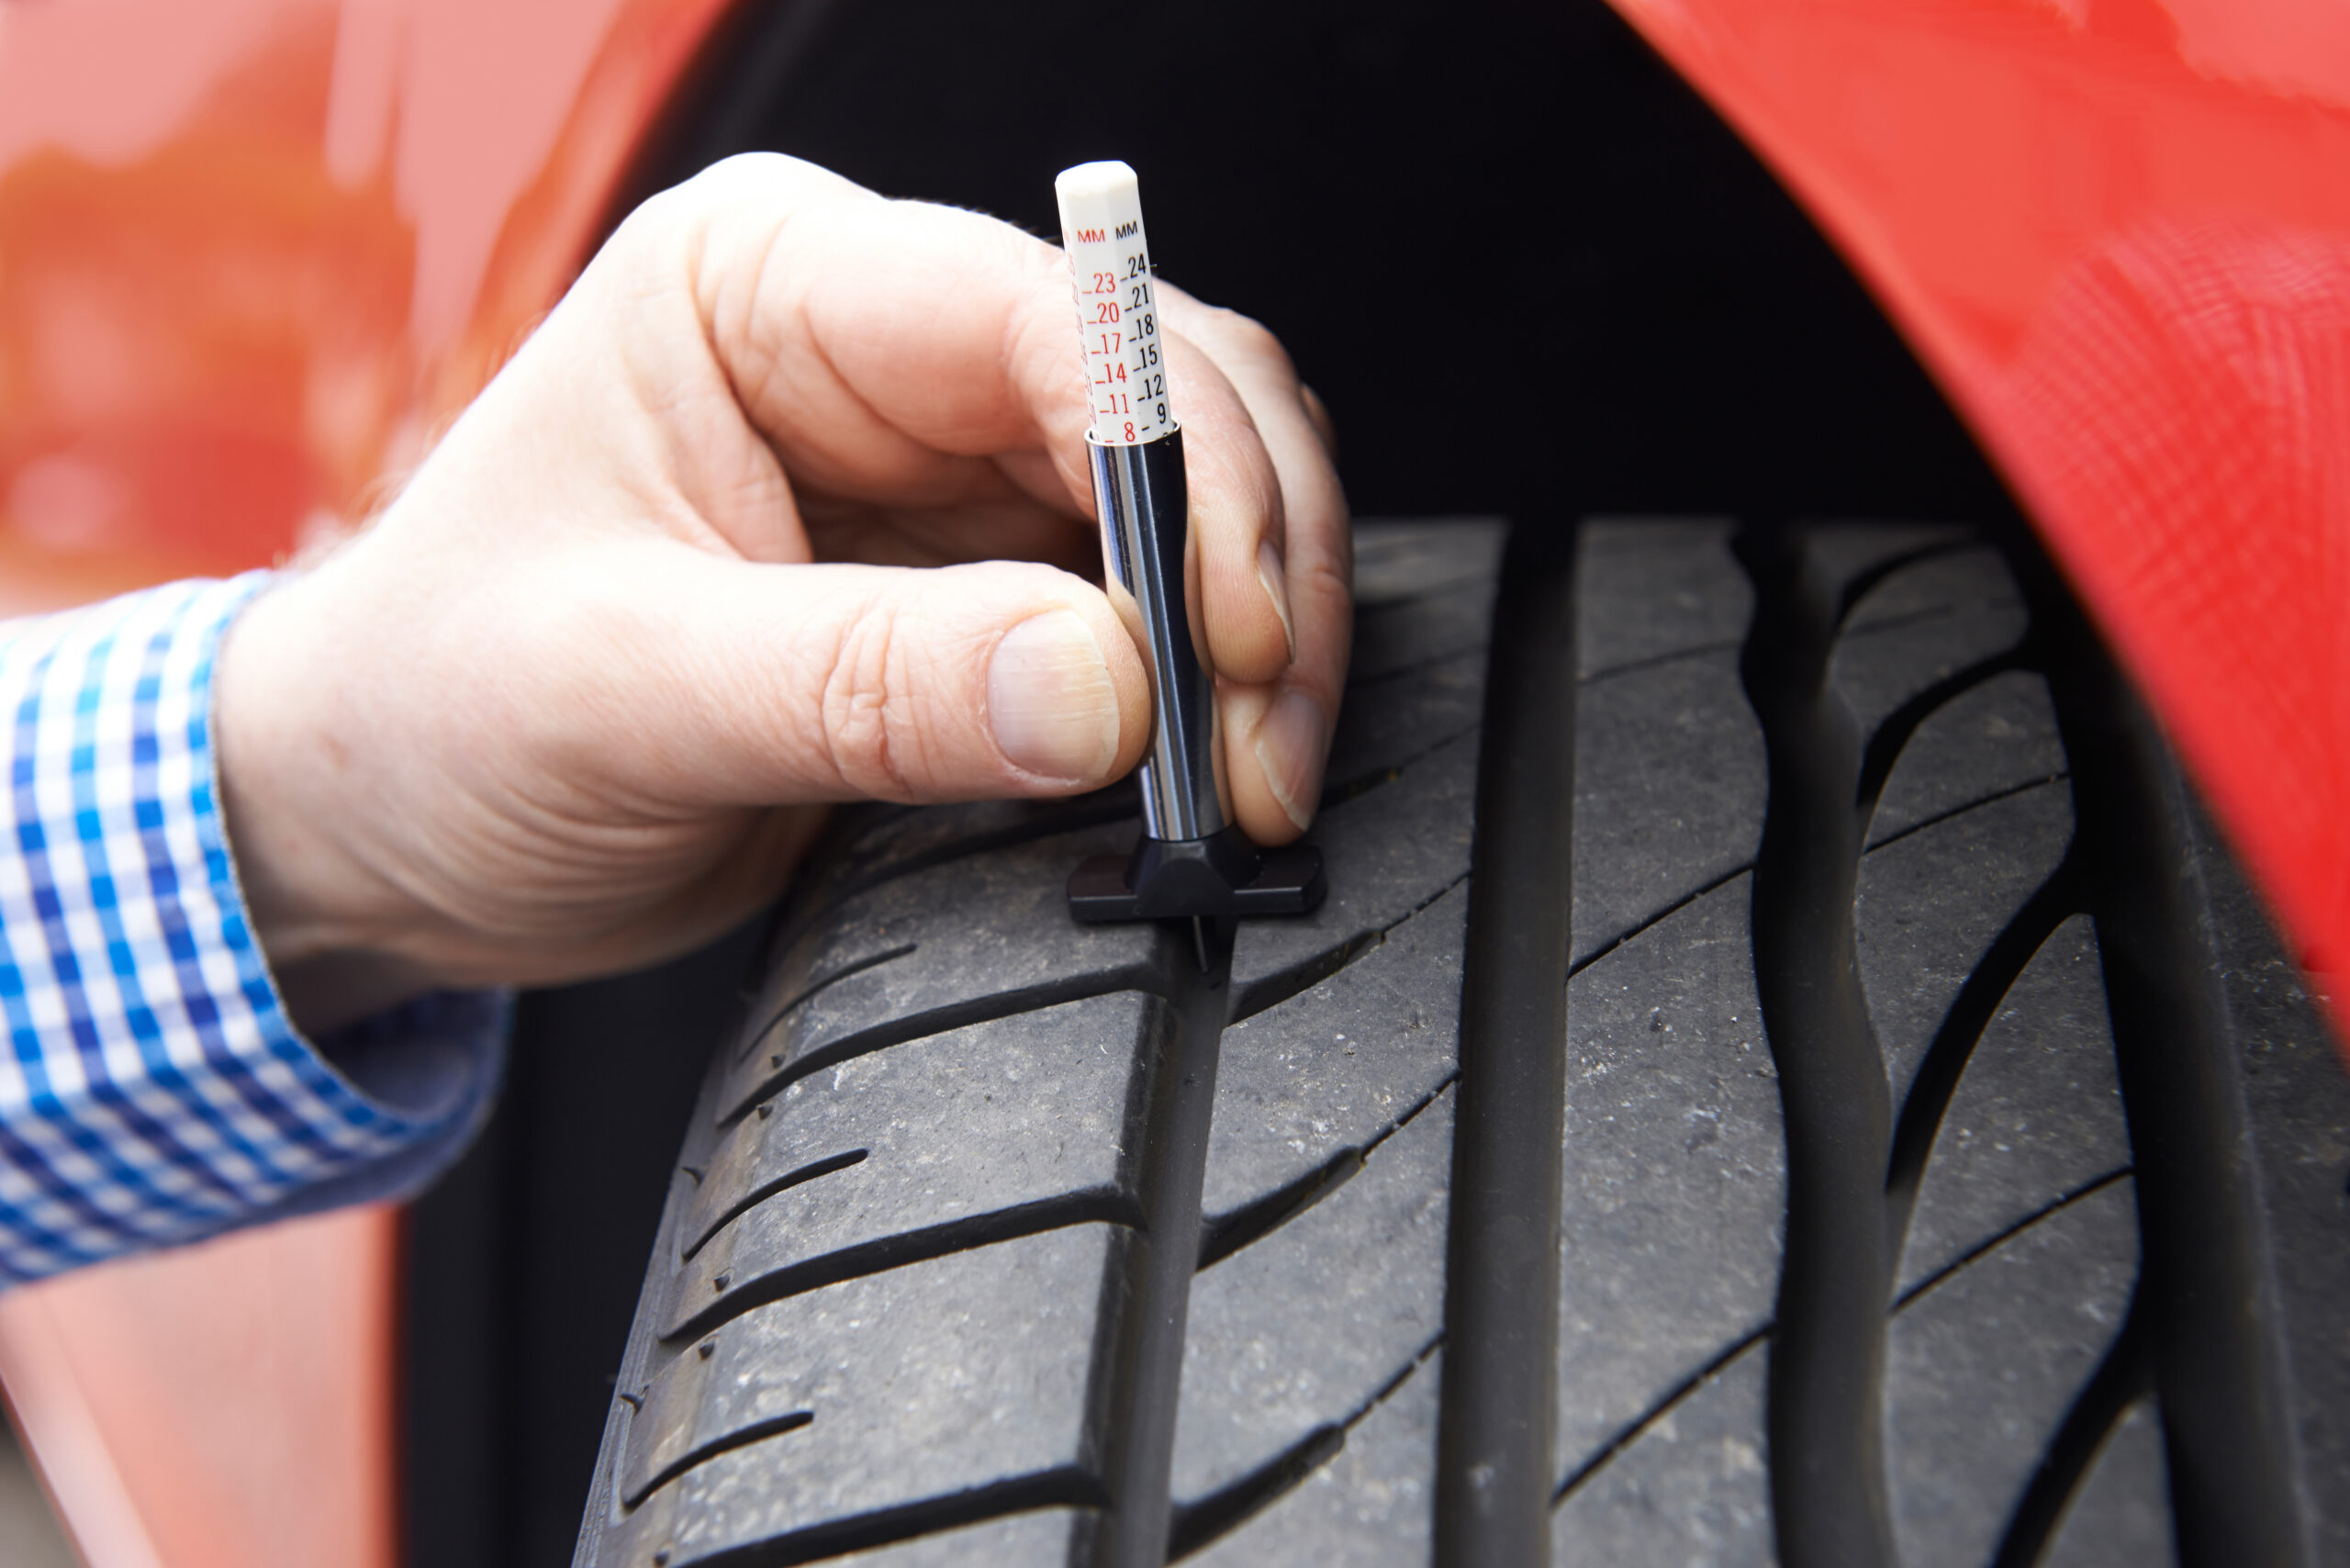 A red car with a black tire in main frame. a man's hand in the frame checking the tire pressure with a tool.